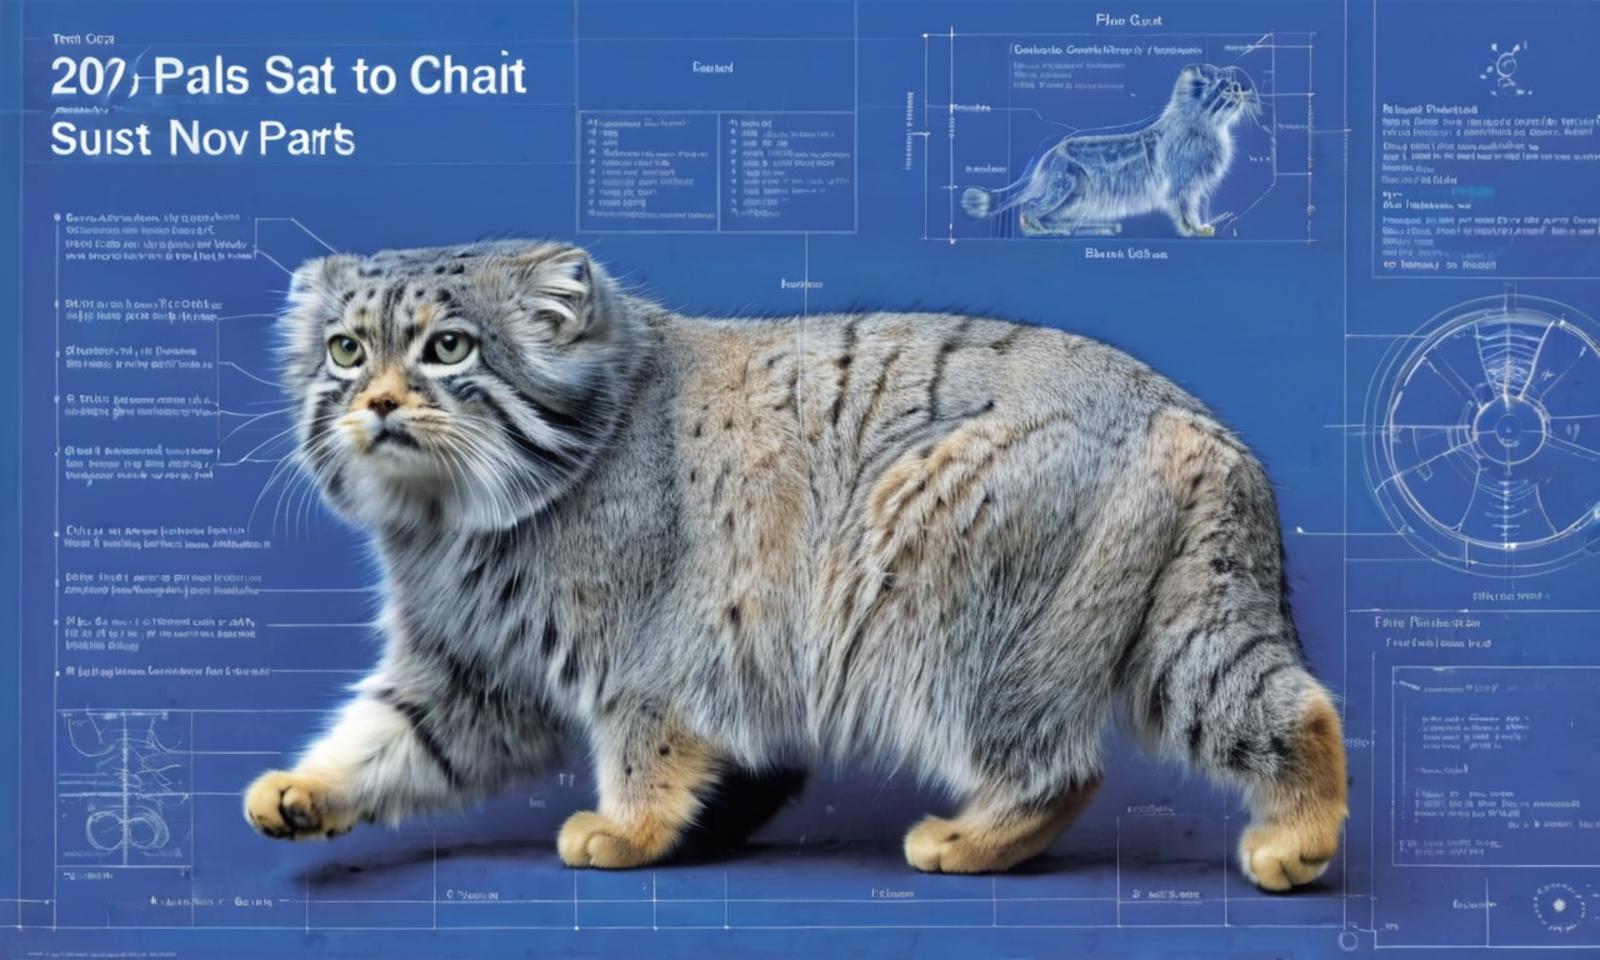 A Chai cat is shown in a blue background with a drawing of a cat on the side.